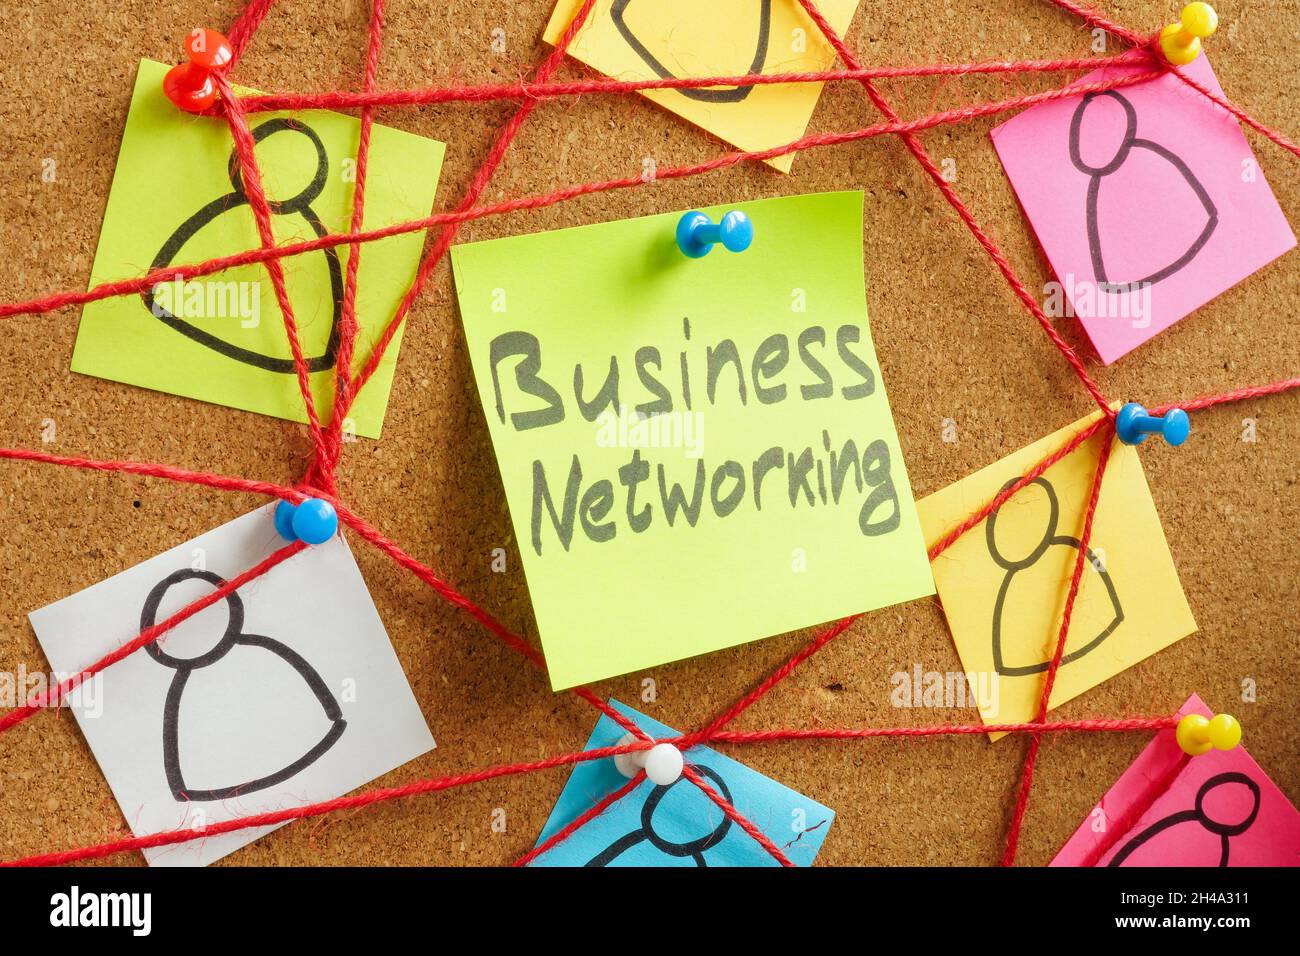 Business networking concept. Stickers connected by a rope. Stock Photo